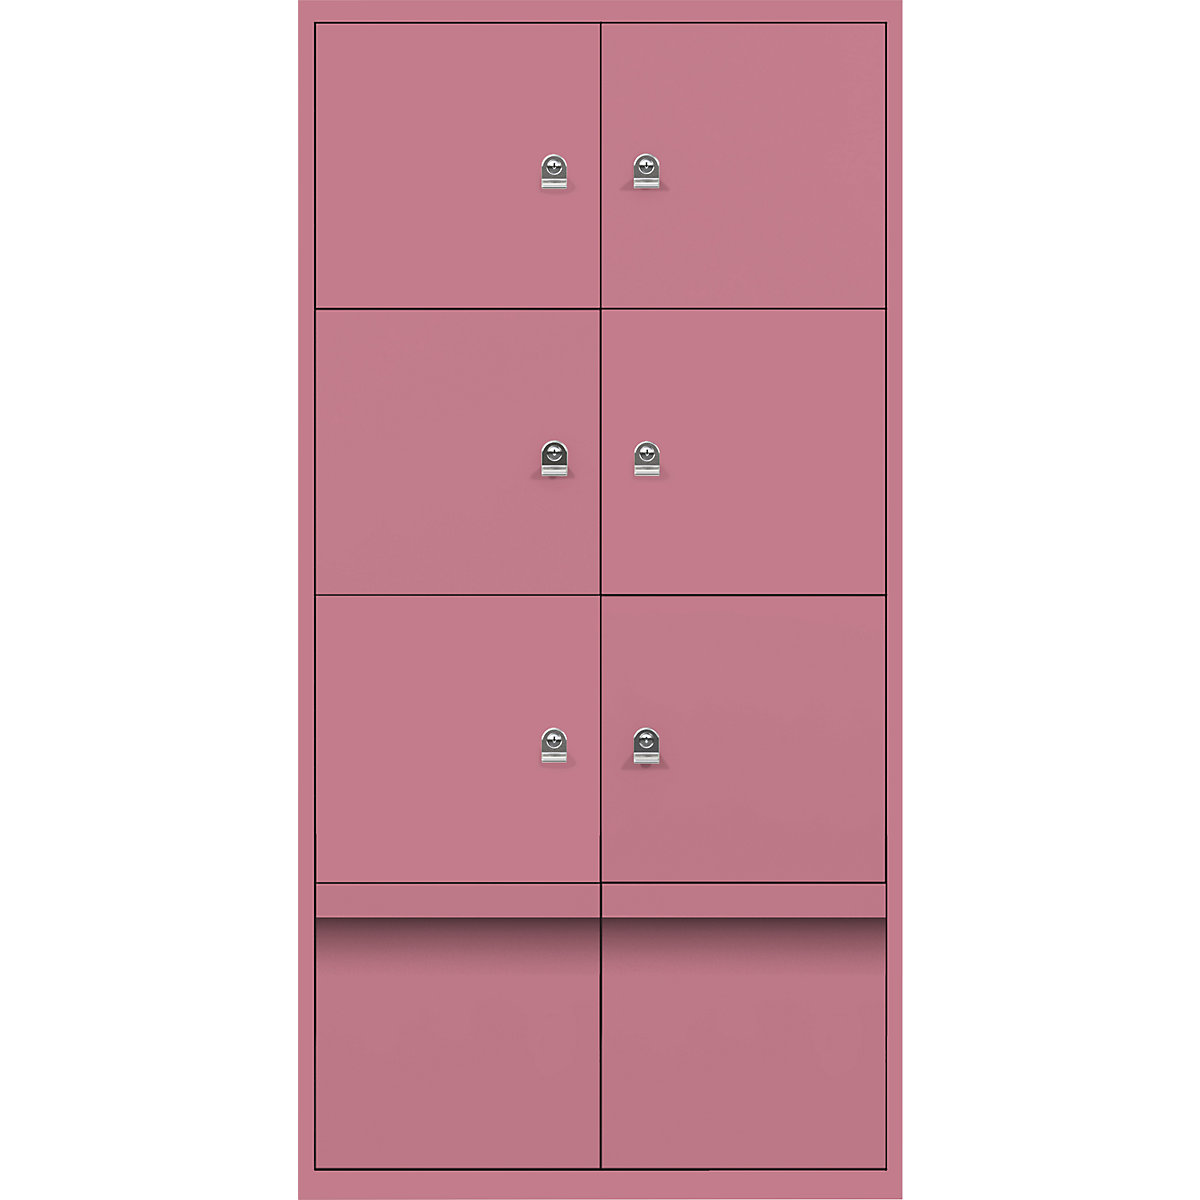 BISLEY – LateralFile™ lodge, with 6 lockable compartments and 2 drawers, height 375 mm each, pink